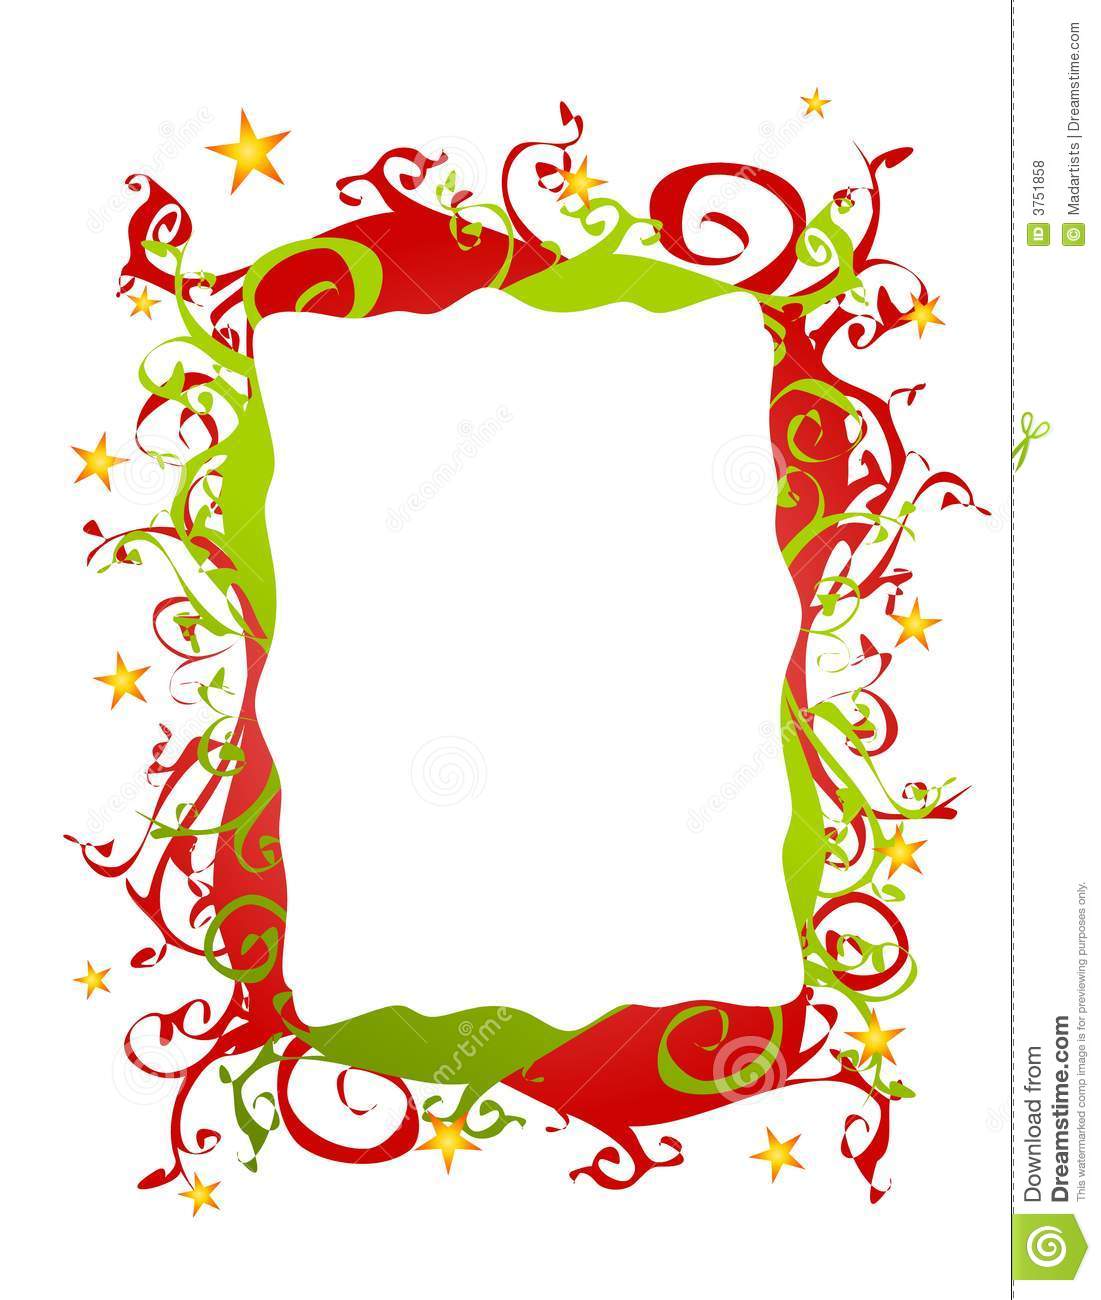 Gold Star Border Clipart   Clipart Panda   Free Clipart Images